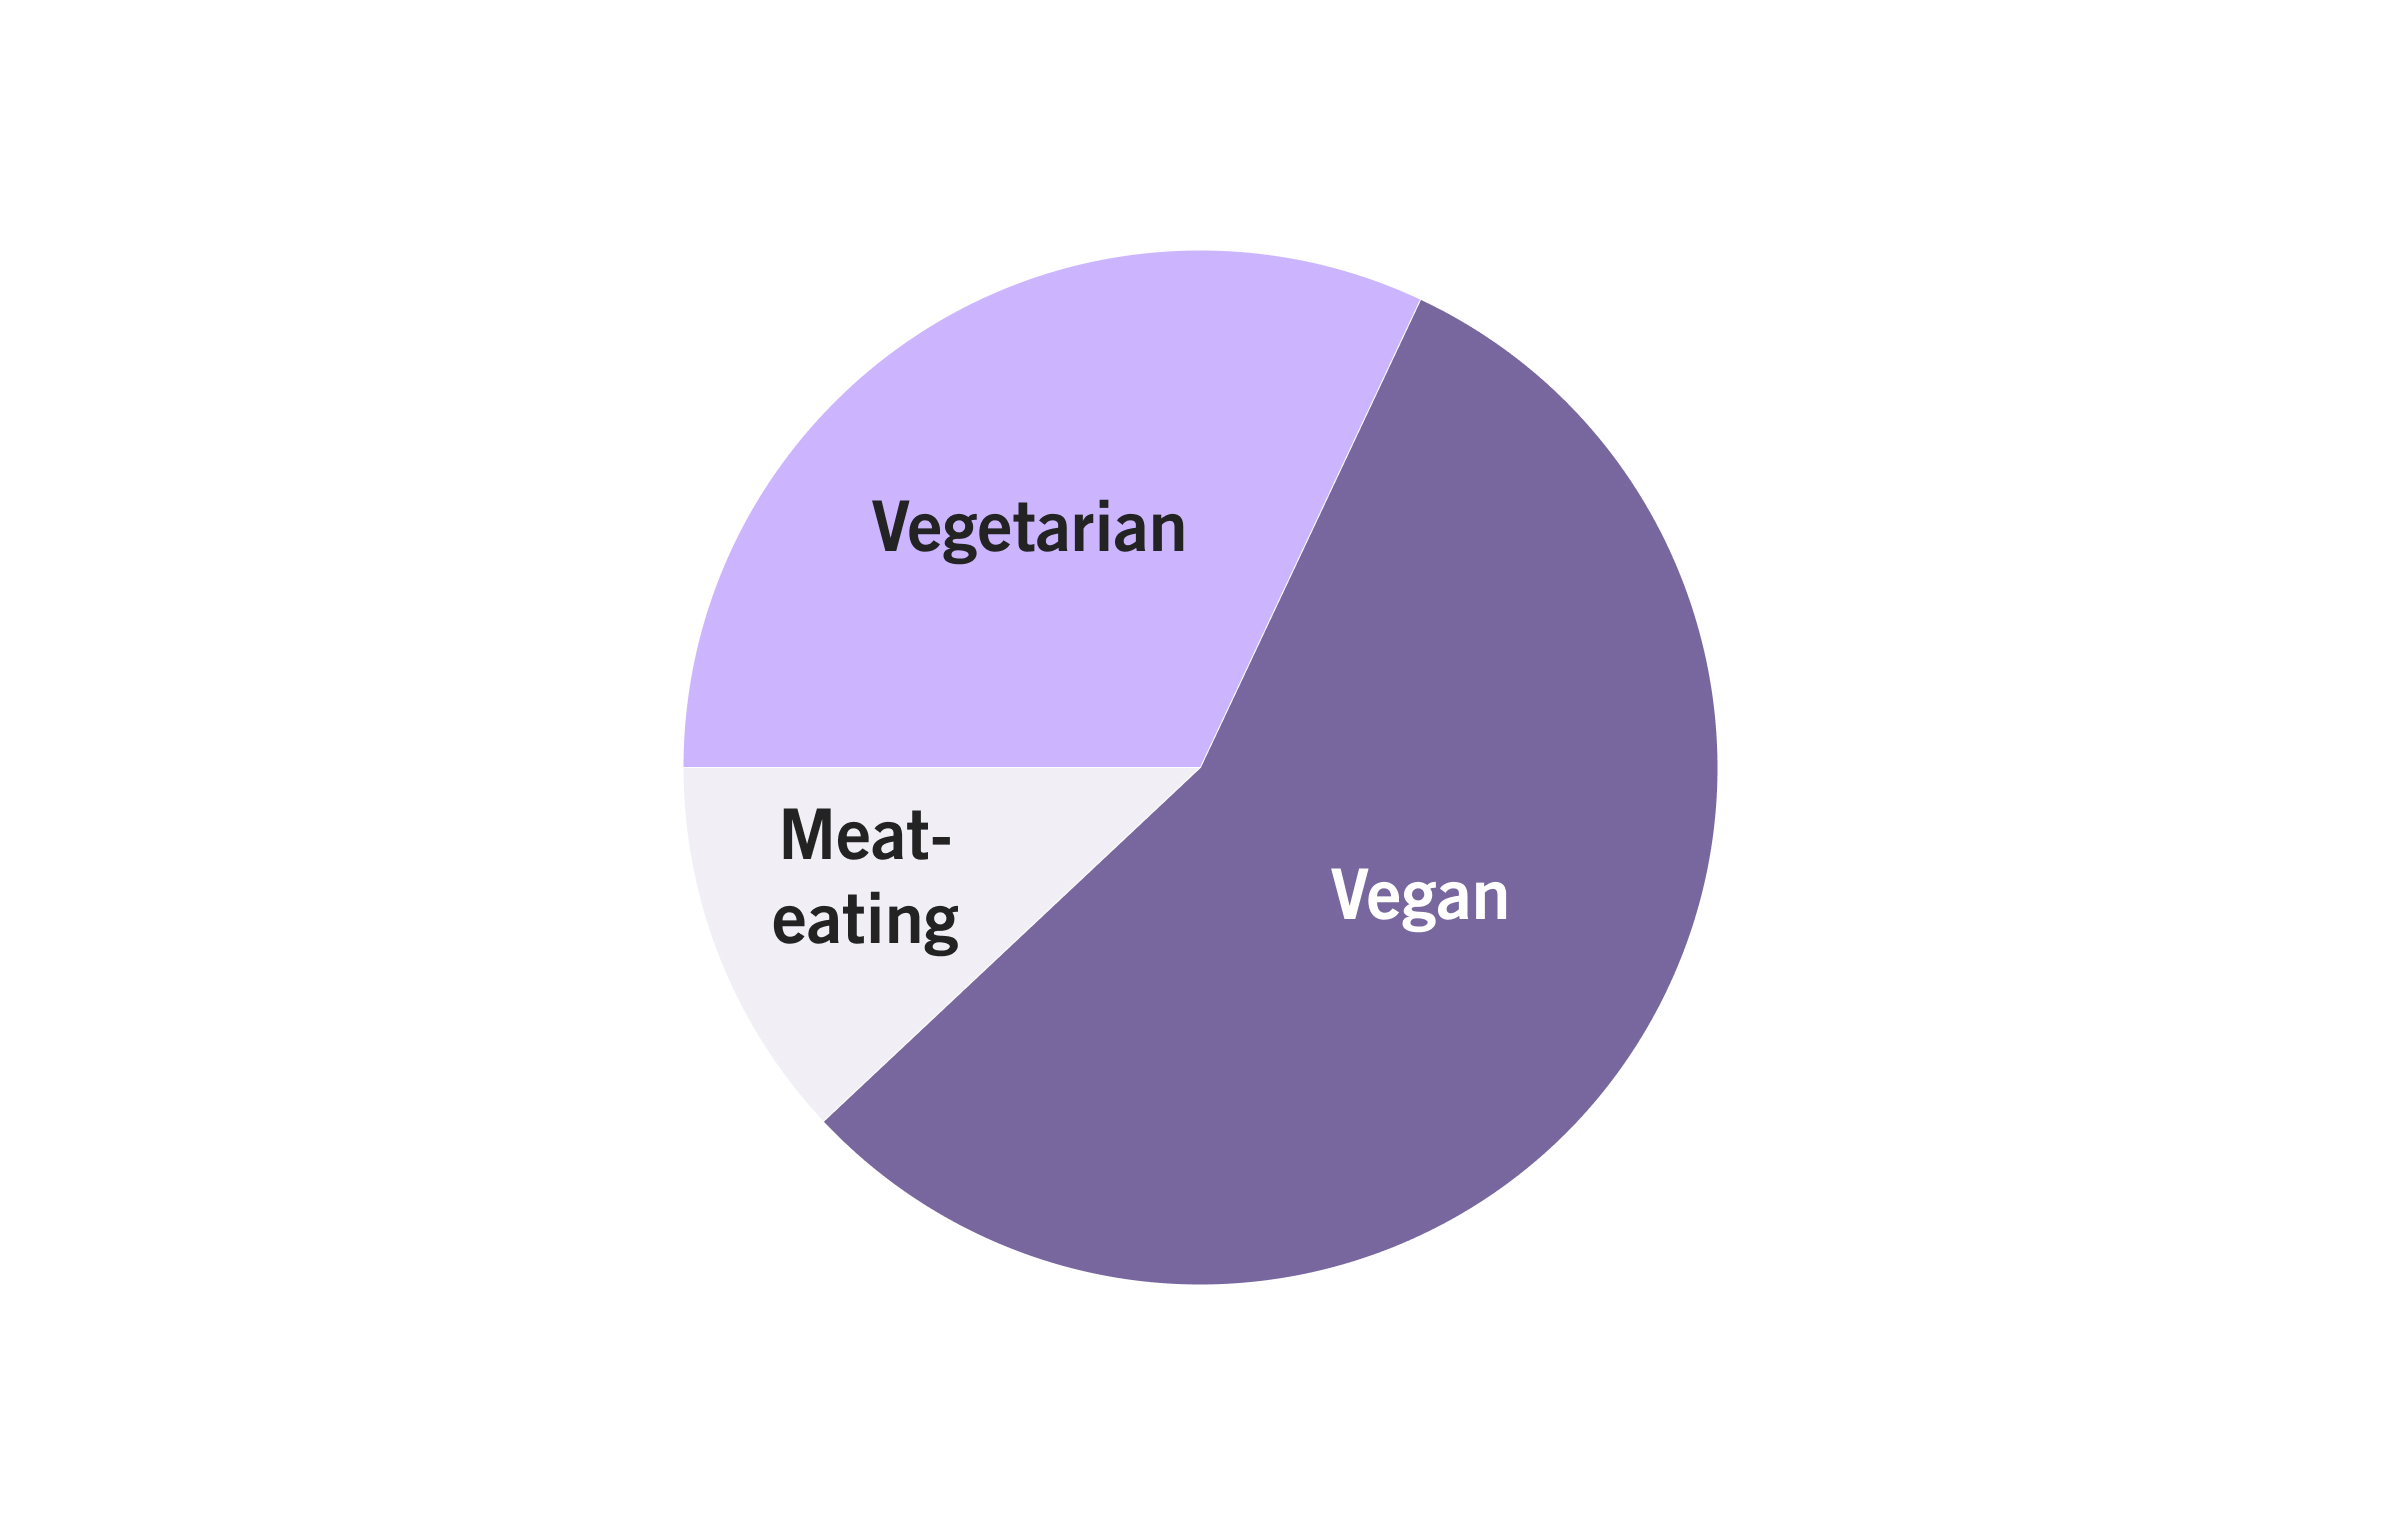 A pie chart showing the eating habits of a sample population, classified as vegetarian, vegan, or meat eaters